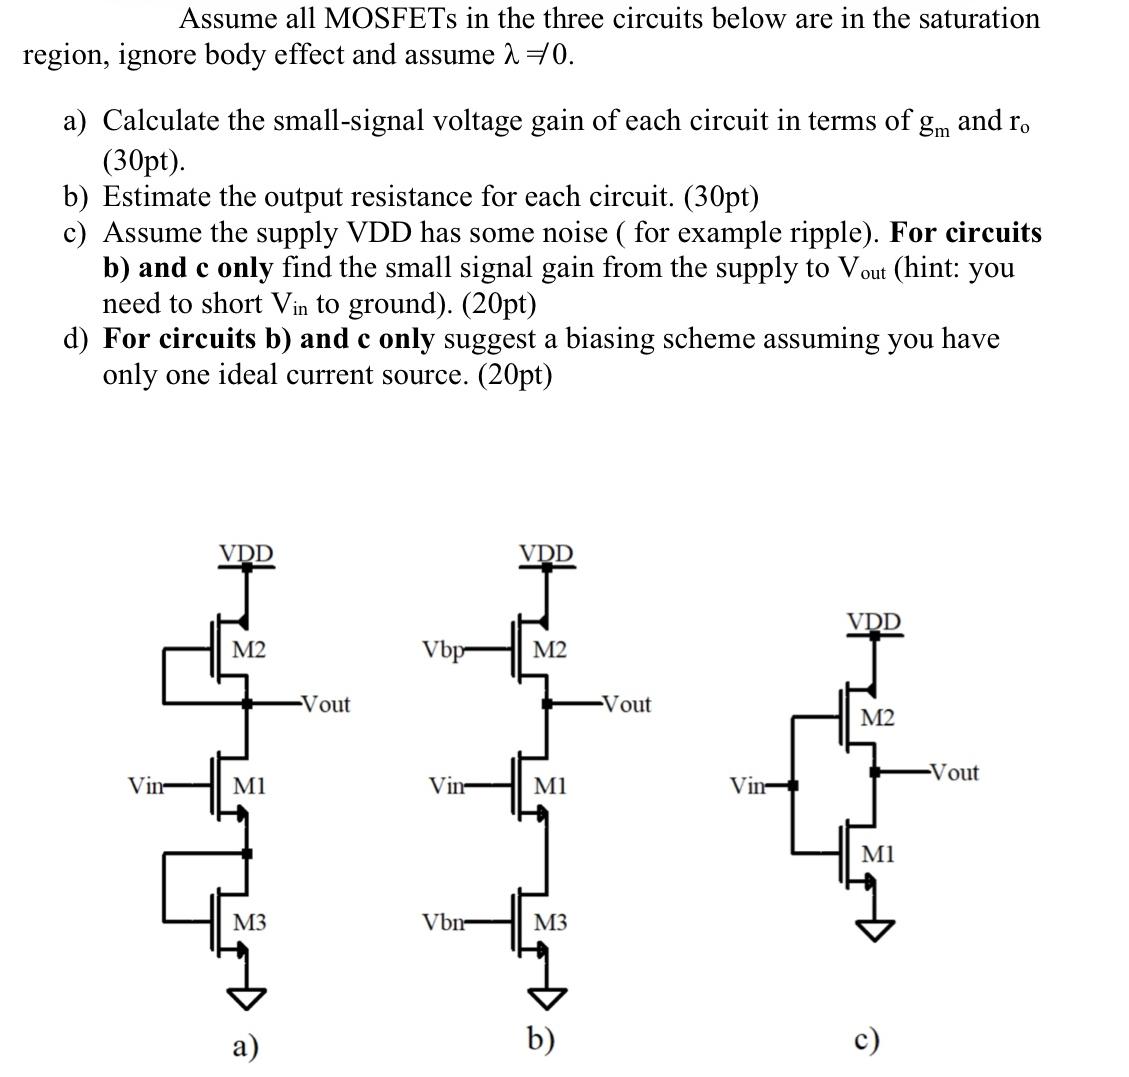 Assume all MOSFETs in the three circuits below are in the saturation region, ignore body effect and assume